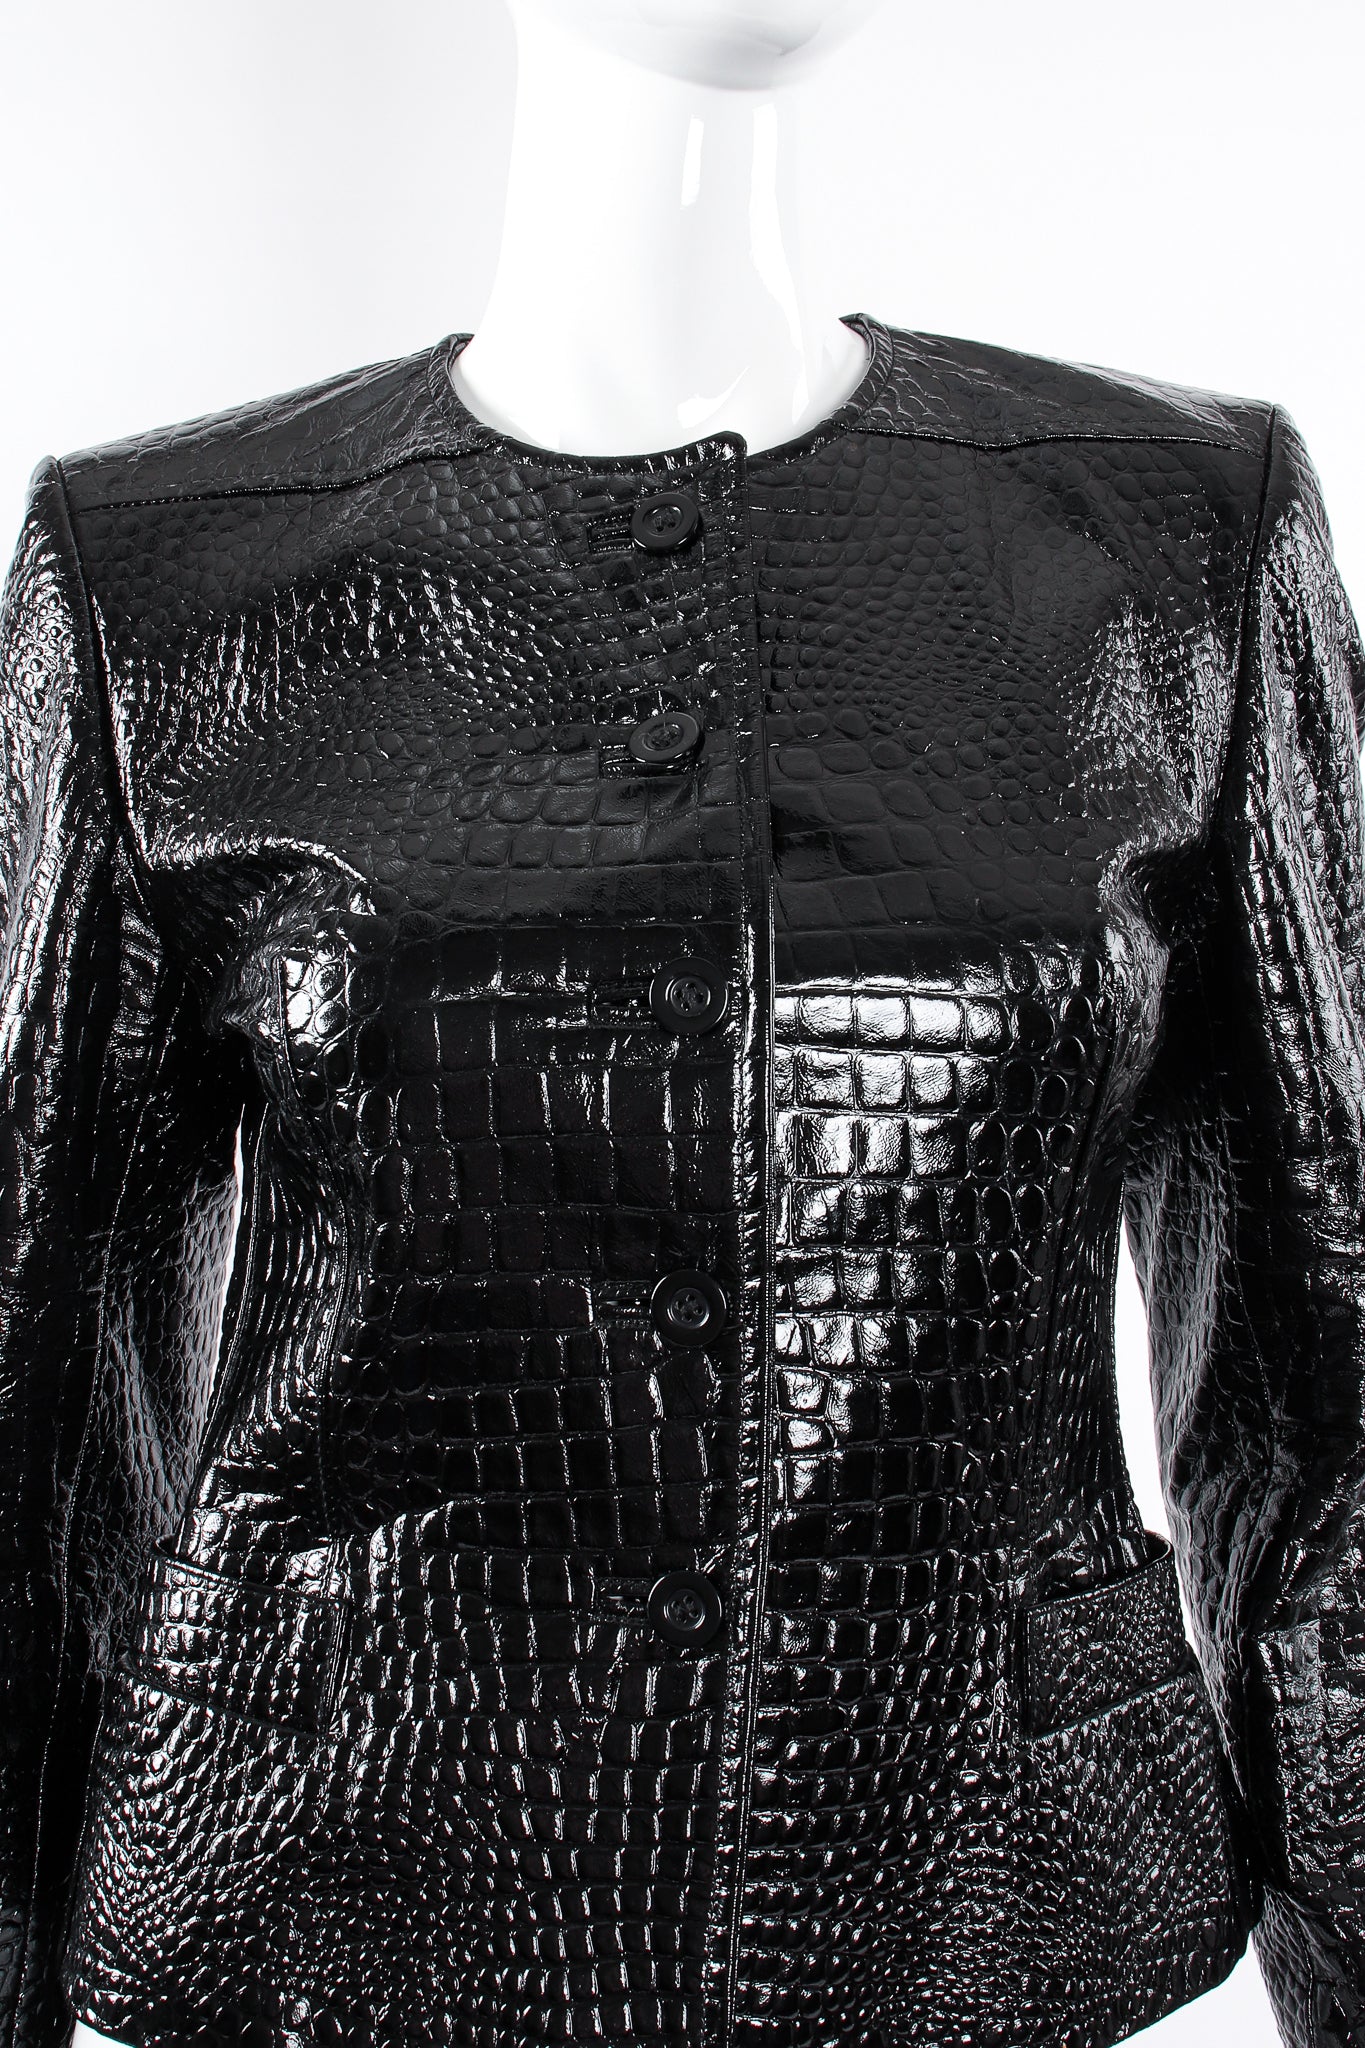 Vintage Escada Patent Leather Embossed Gator Jacket on Mannequin front crop at Recess Los Angeles